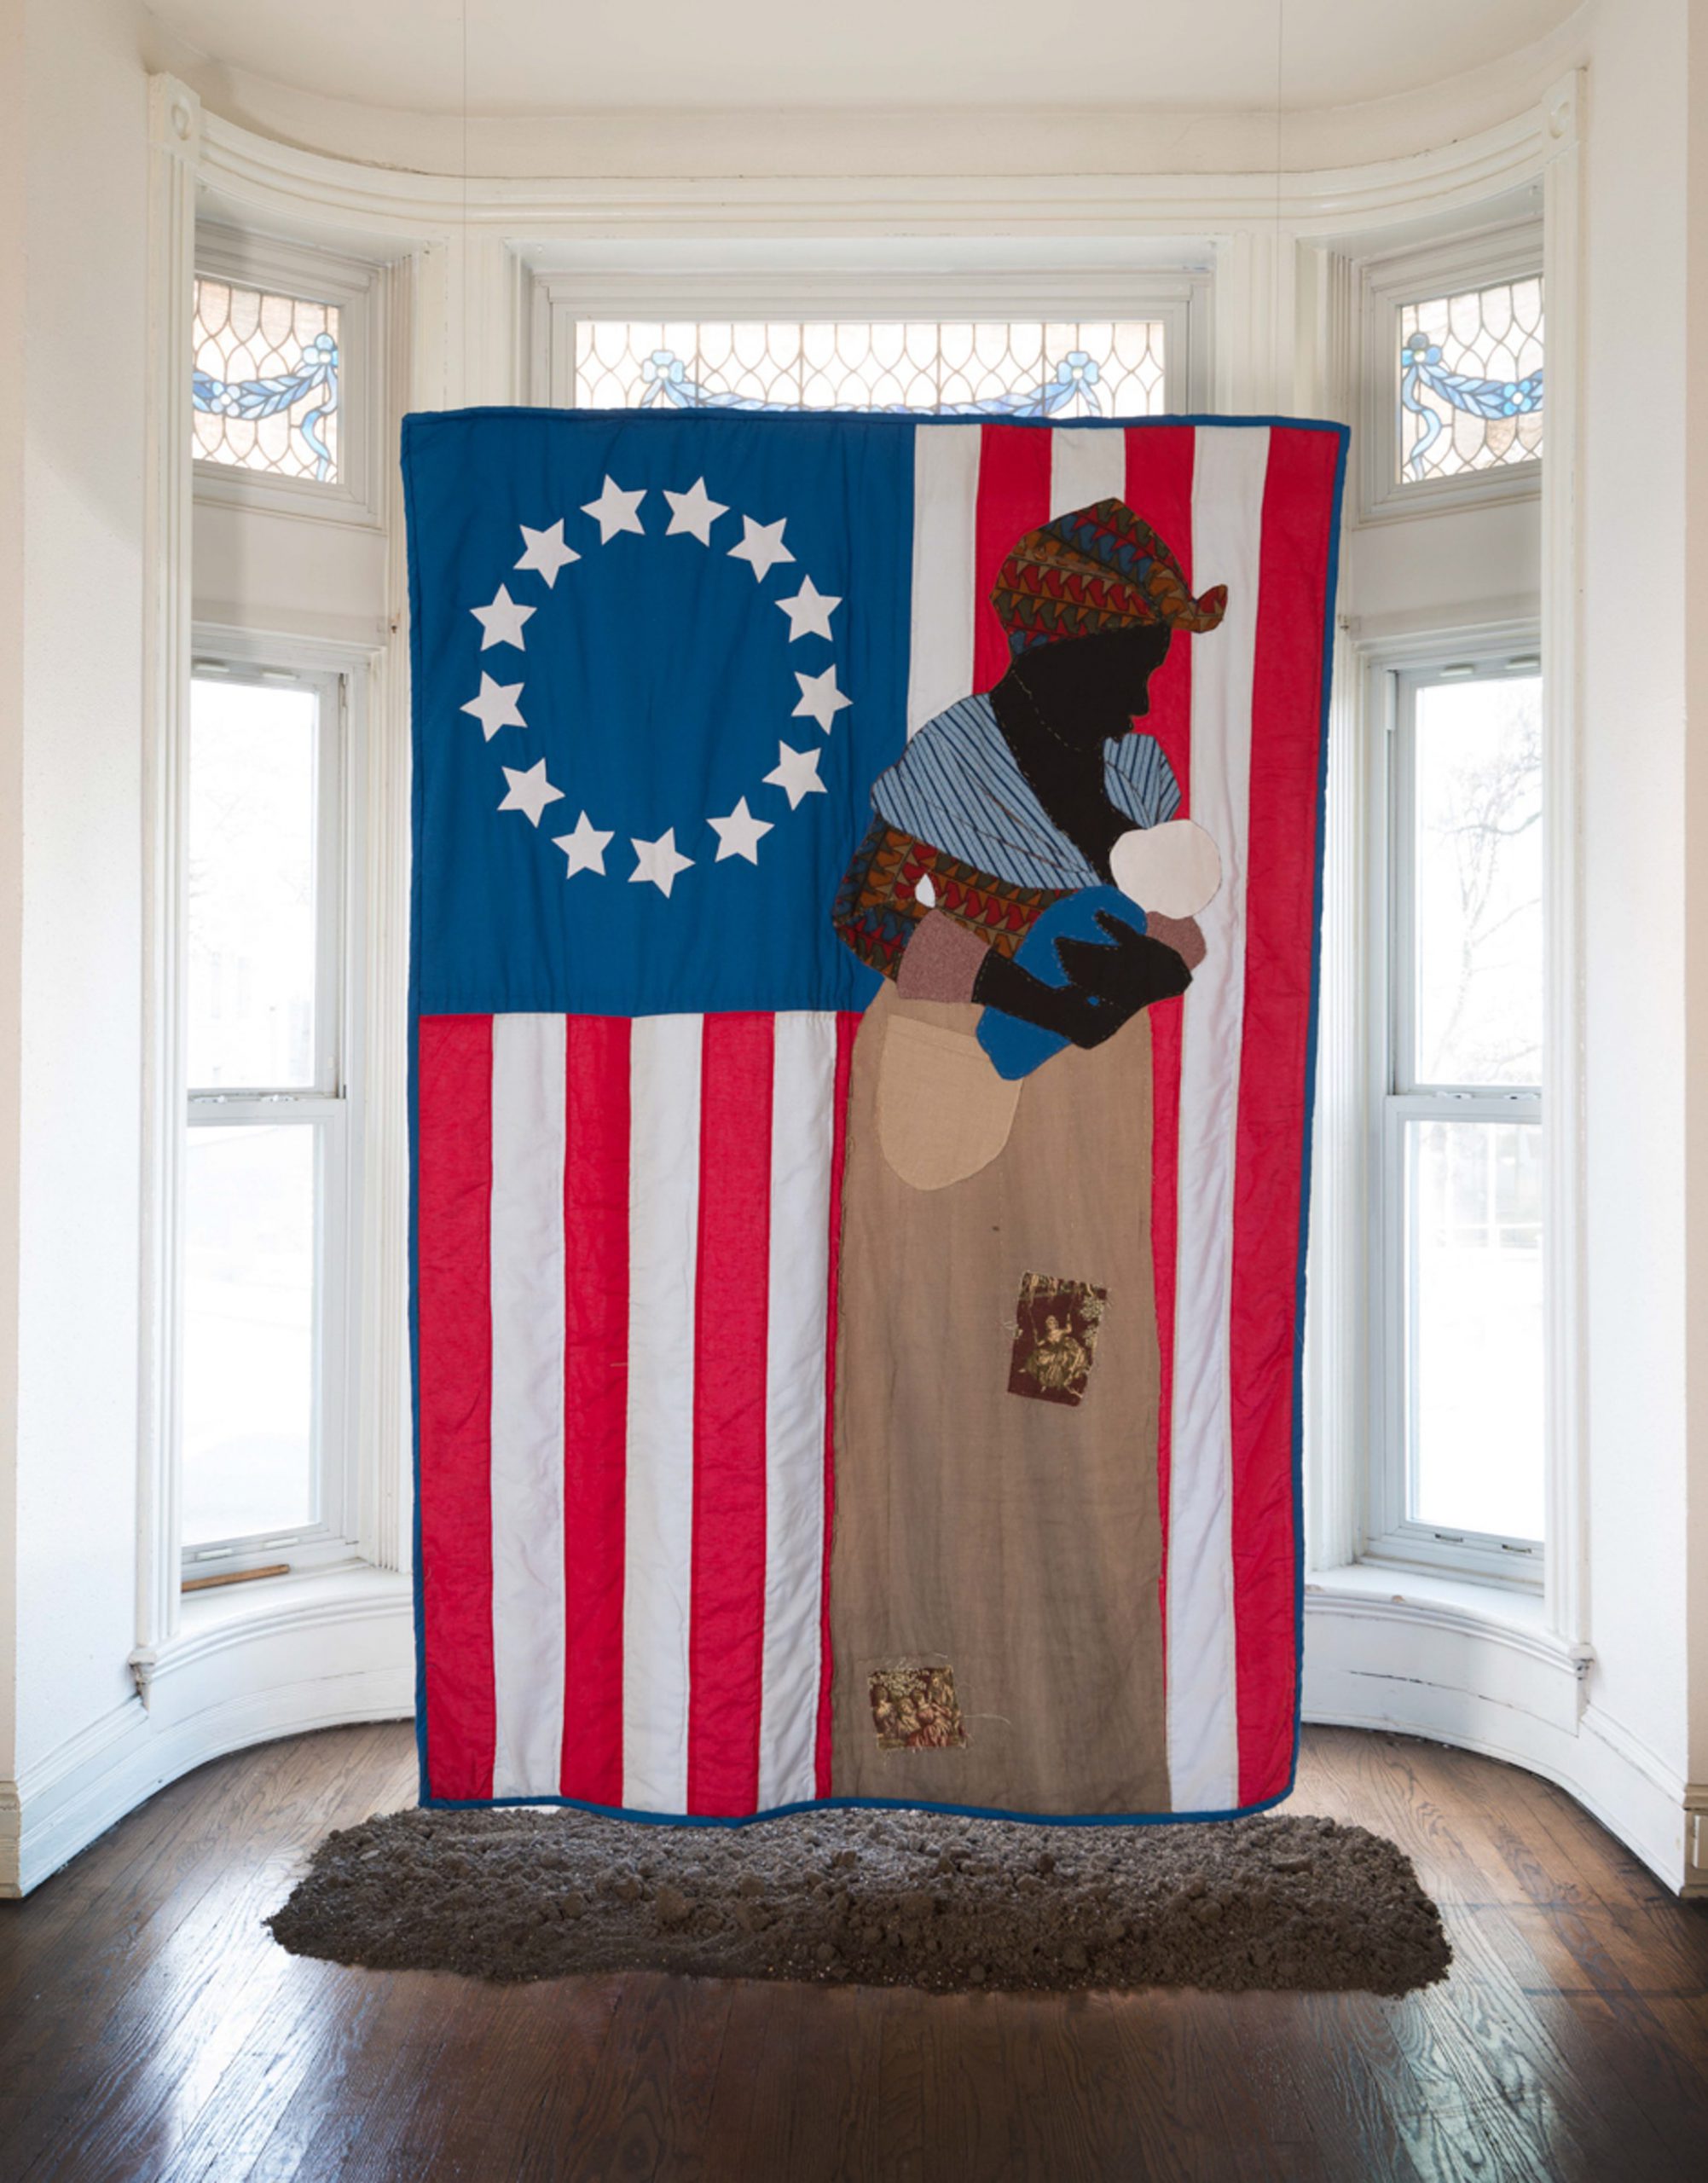 Stephen Towns, Birth of a Nation, 2014. Natural and synthetic fabric, polyester and cotton thread, metallic thread, coffee and tea stain, acrylic paint. 90 x 66 inches. Private collection.